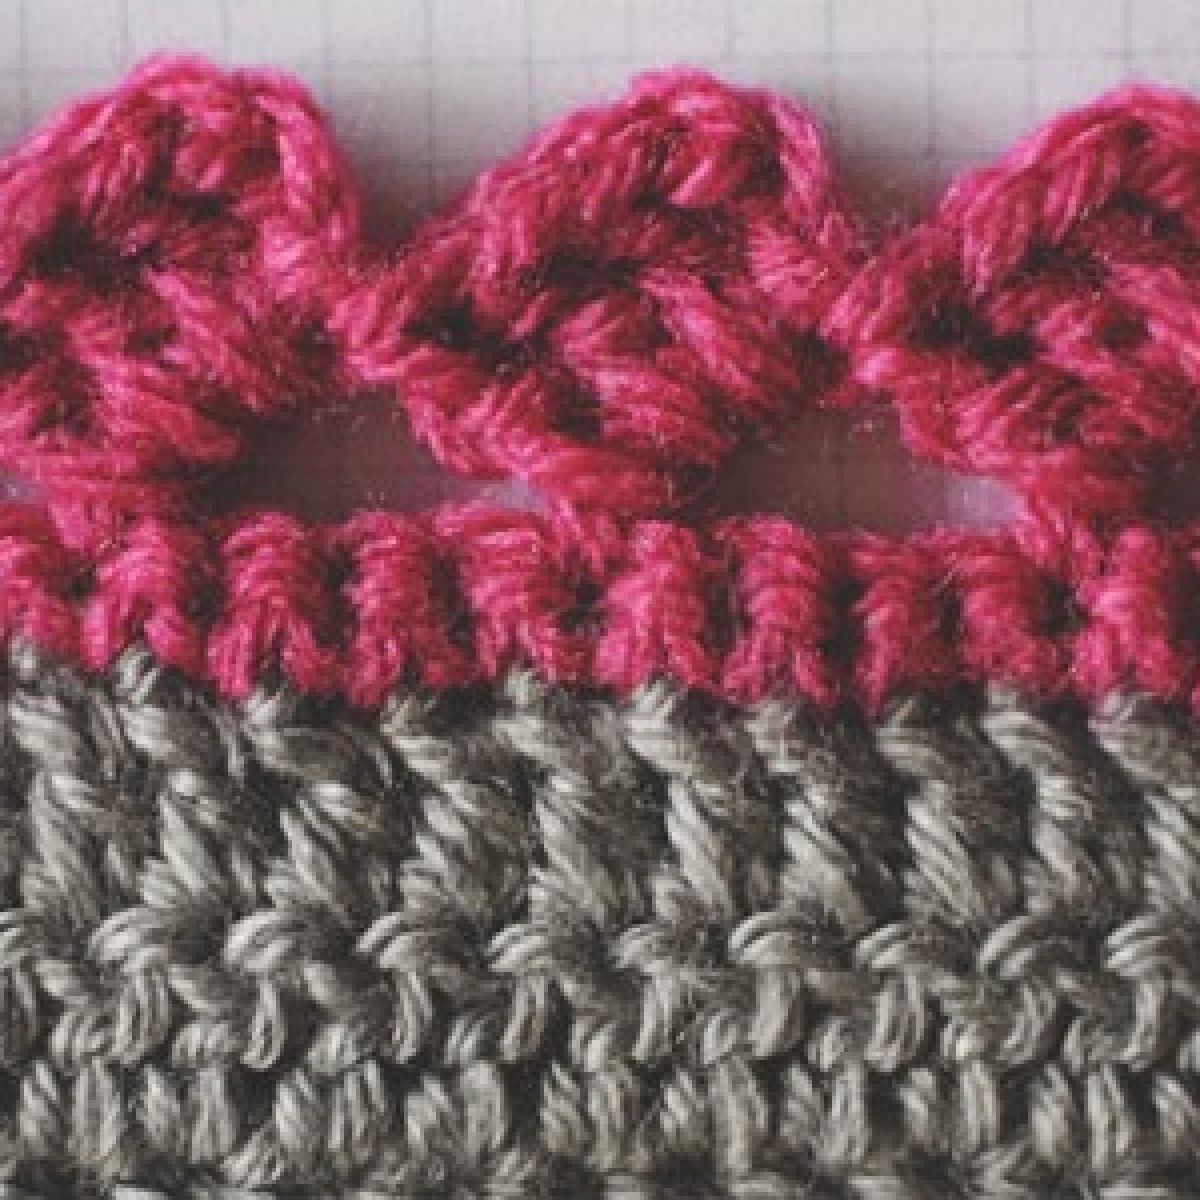 5 Crochet Edges to Have in Your Arsenal